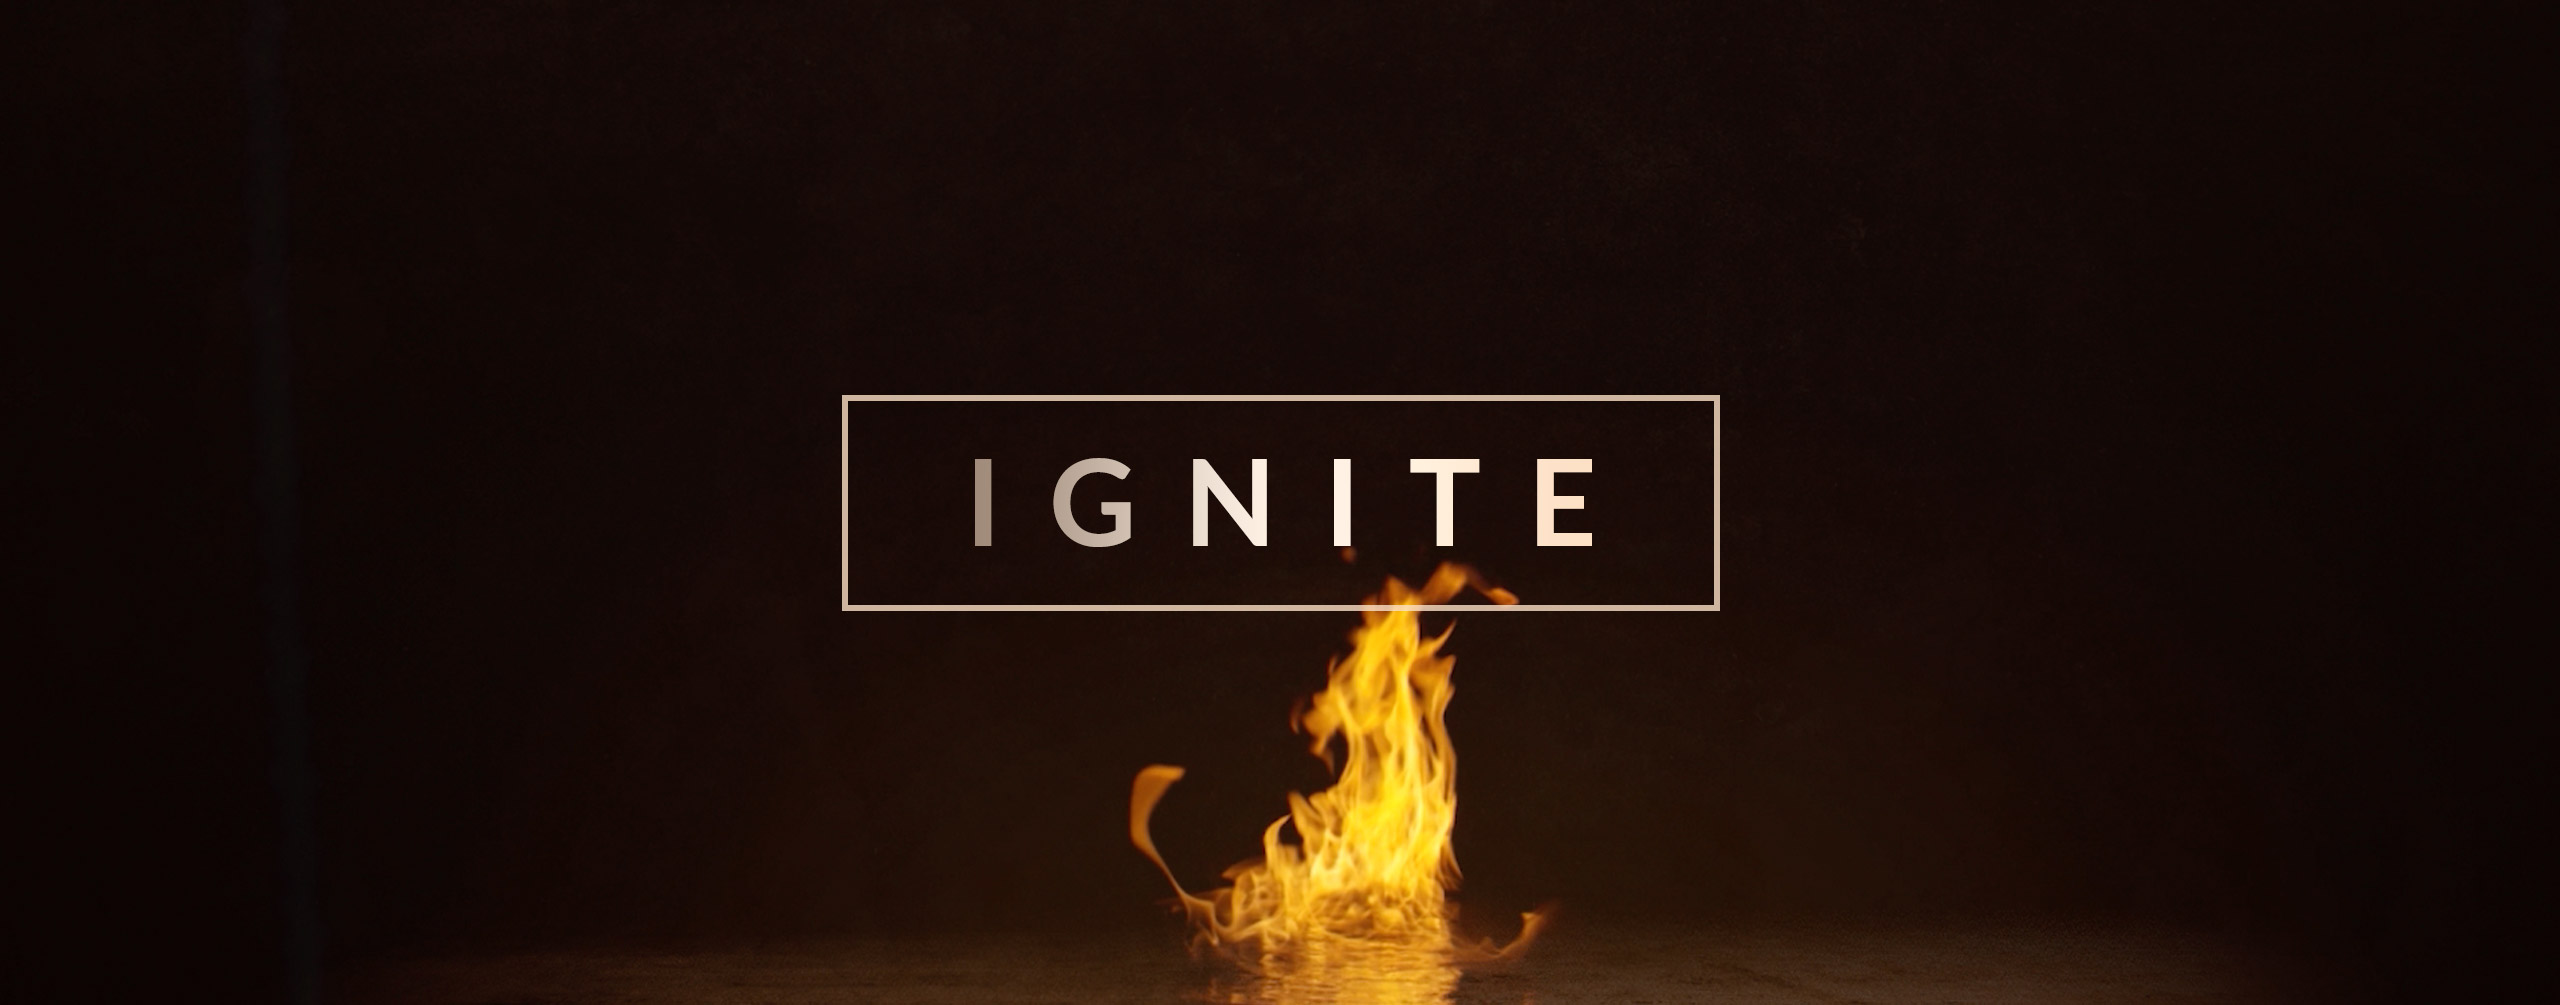 Ignite - Fire and Flame Effects